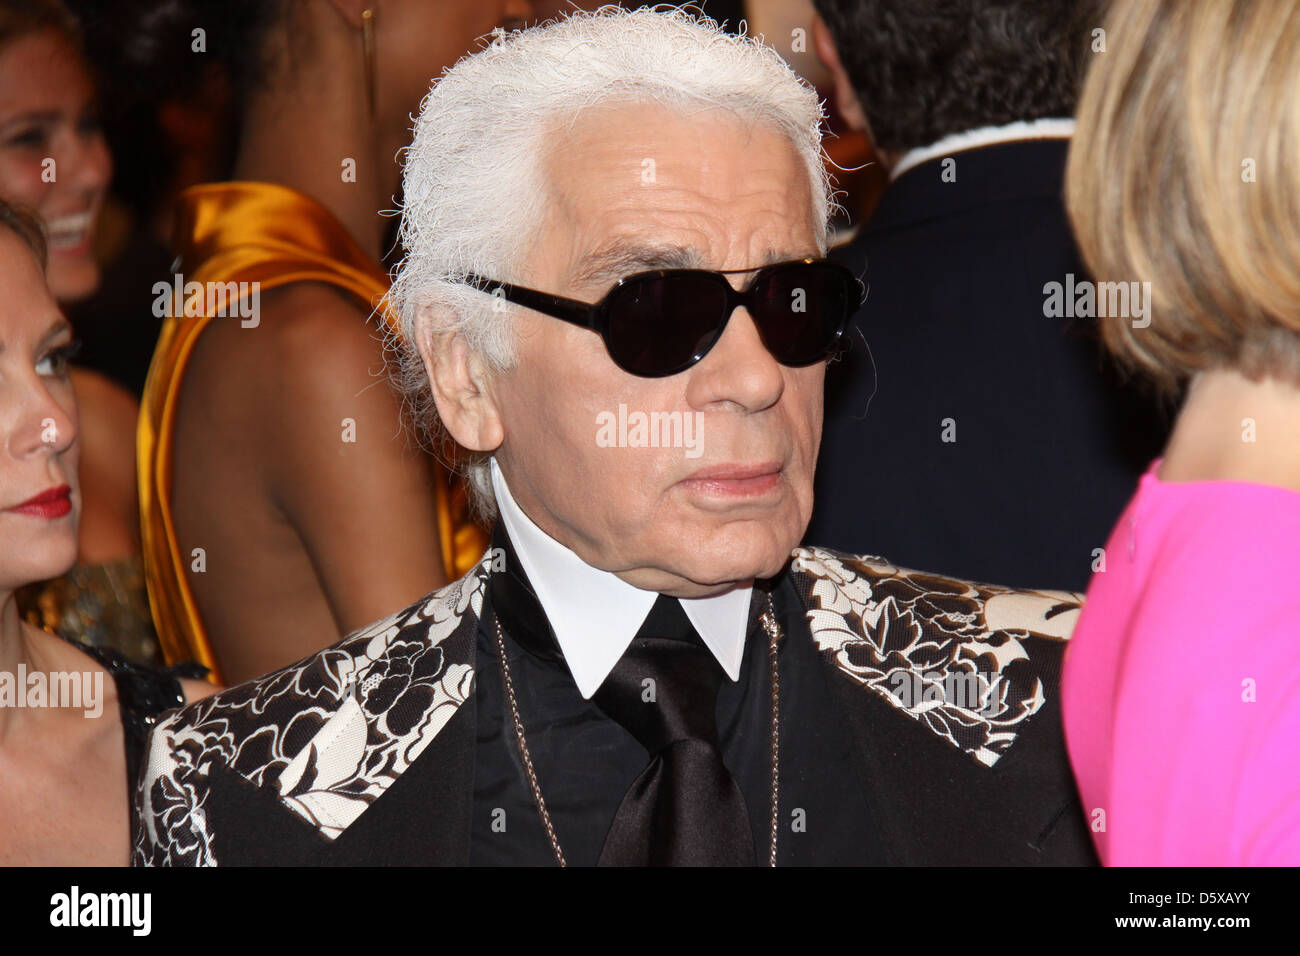 Karl lagerfeld alexander mcqueen hi-res stock photography and images - Alamy